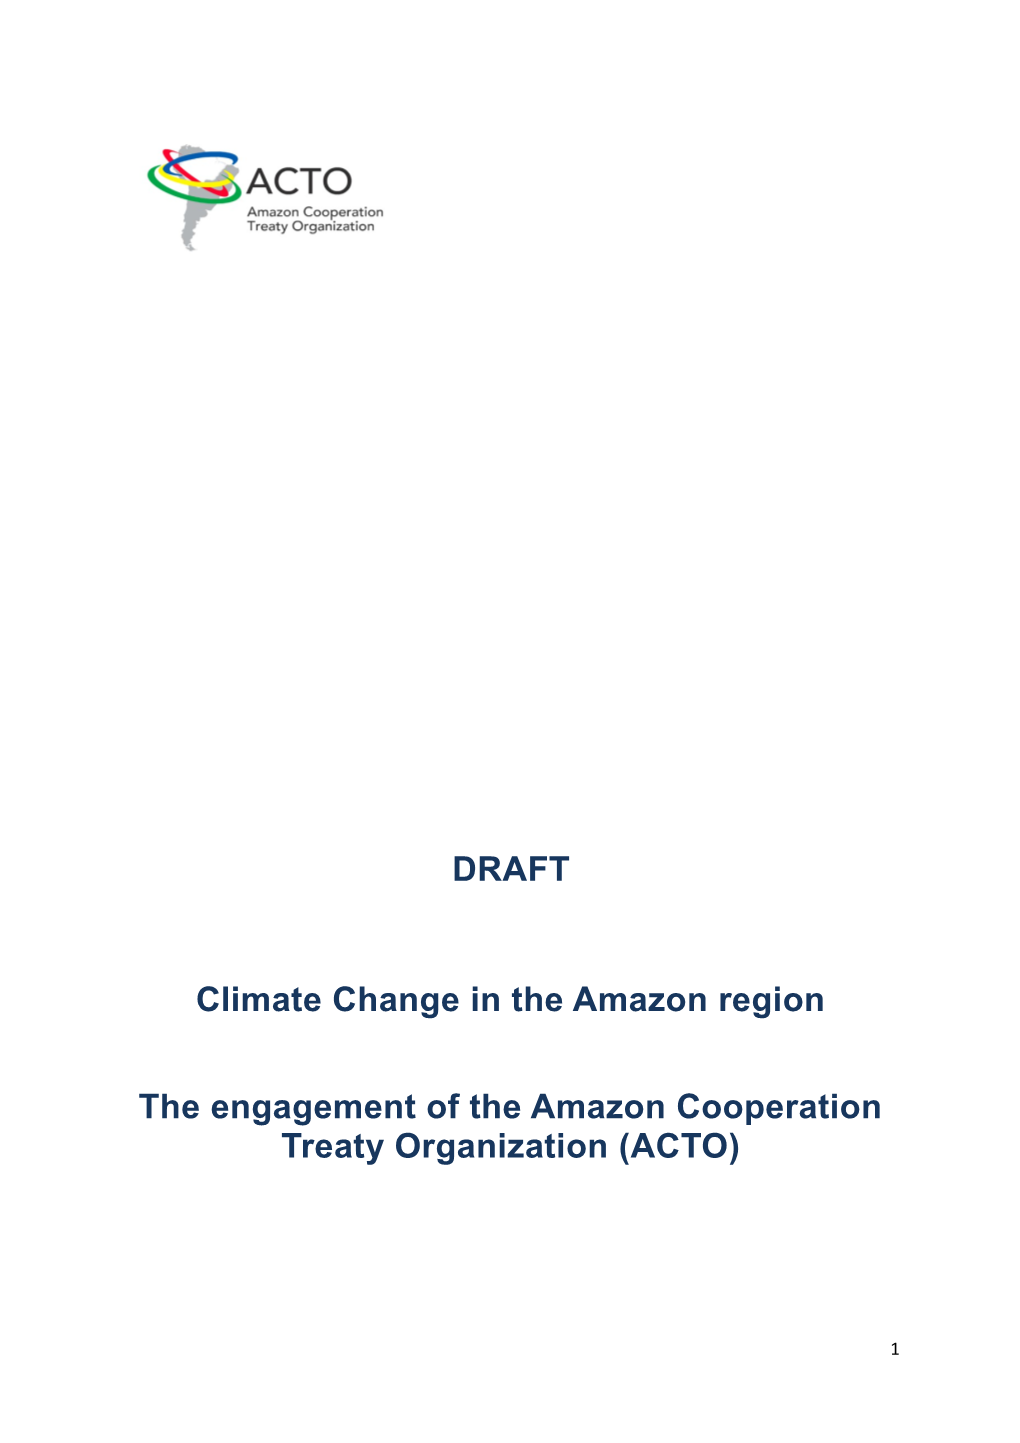 Climate Change in the Amazon Region